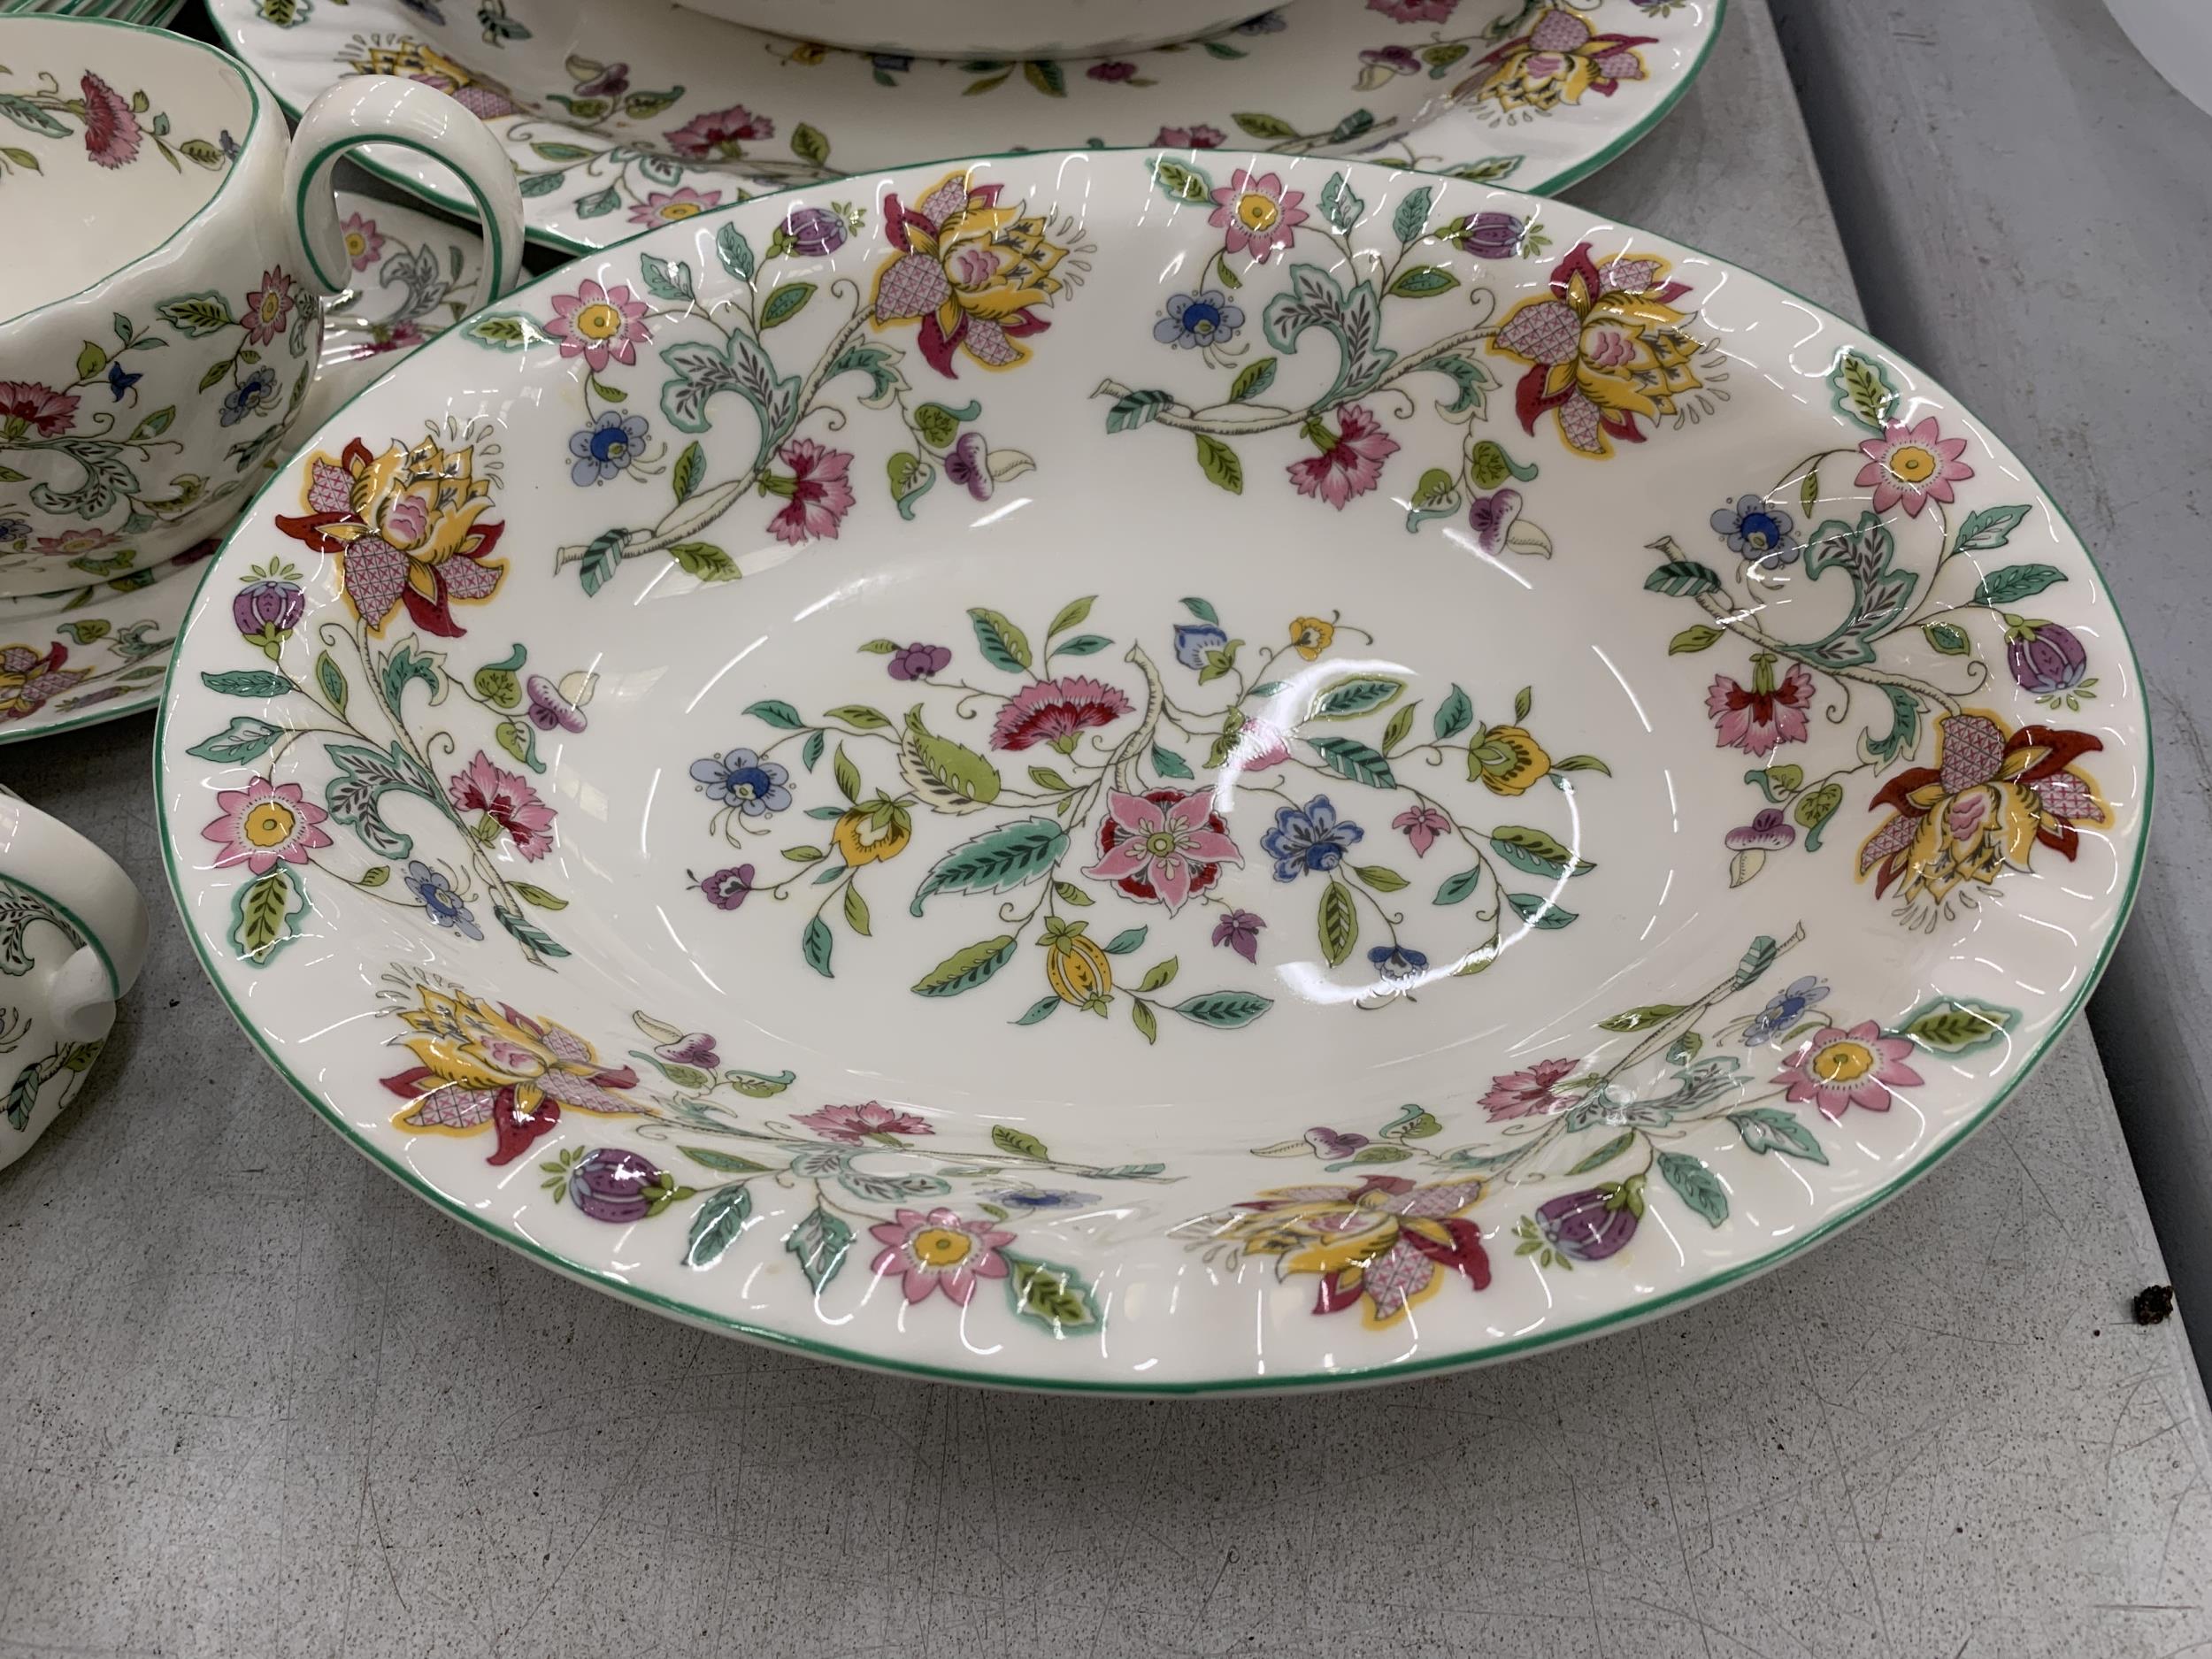 A LARGE QUANTITY OF MINTON HADDON HALL TO INCLUDE SERVING BOWLS, PLATTER, DINNER PLATES, SOUP BOWLS, - Image 4 of 7